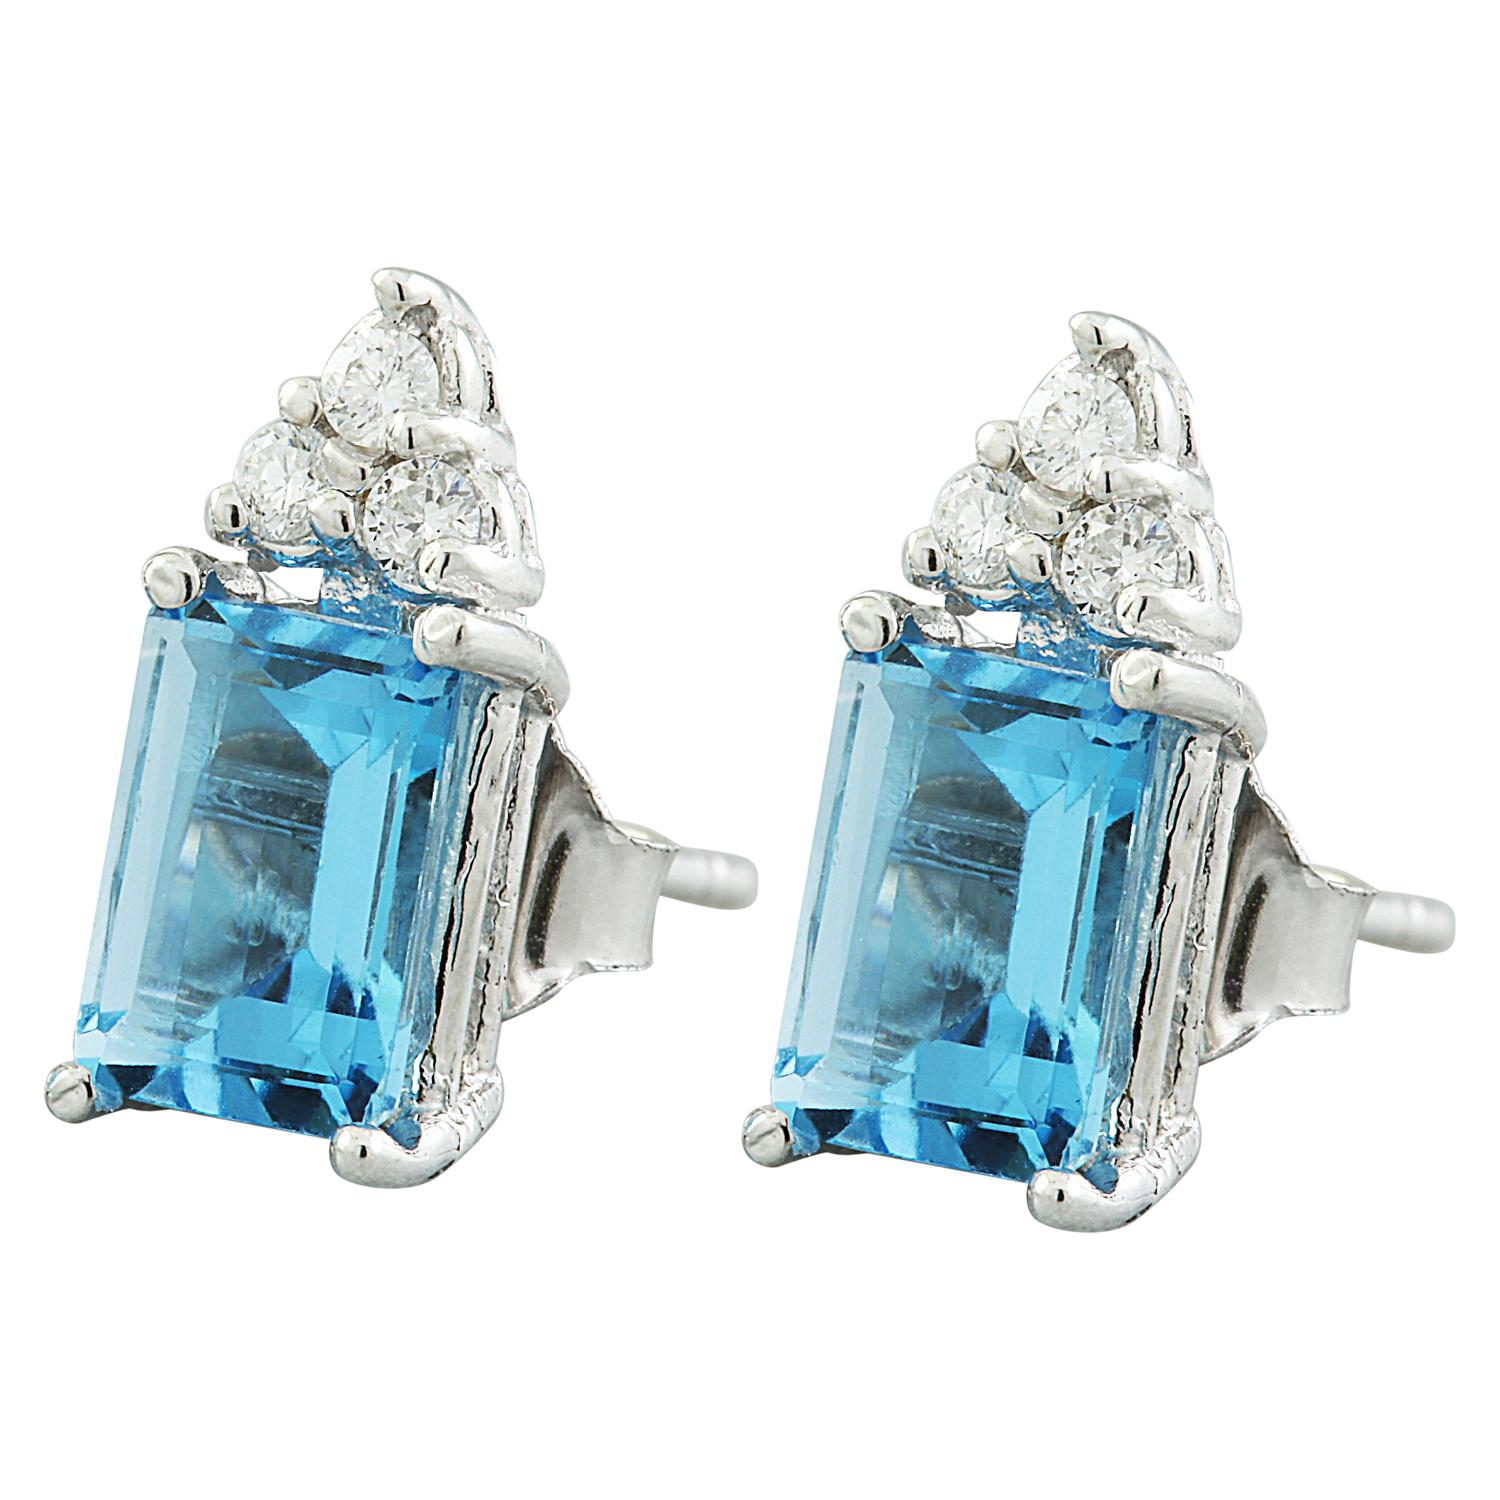 2.65 Carat Natural Topaz 14 Karat Solid White Gold Diamond Earrings
Stamped: 14K 
Total Earrings Weight: 1.5 Grams 
Topaz Weight: 2.50 Carat (7.00x5.00 Millimeters)  
Diamond Weight: 0.15 Carat (F-G Color, VS2-SI1 Clarity )
Face Measures: 12.00x5.00